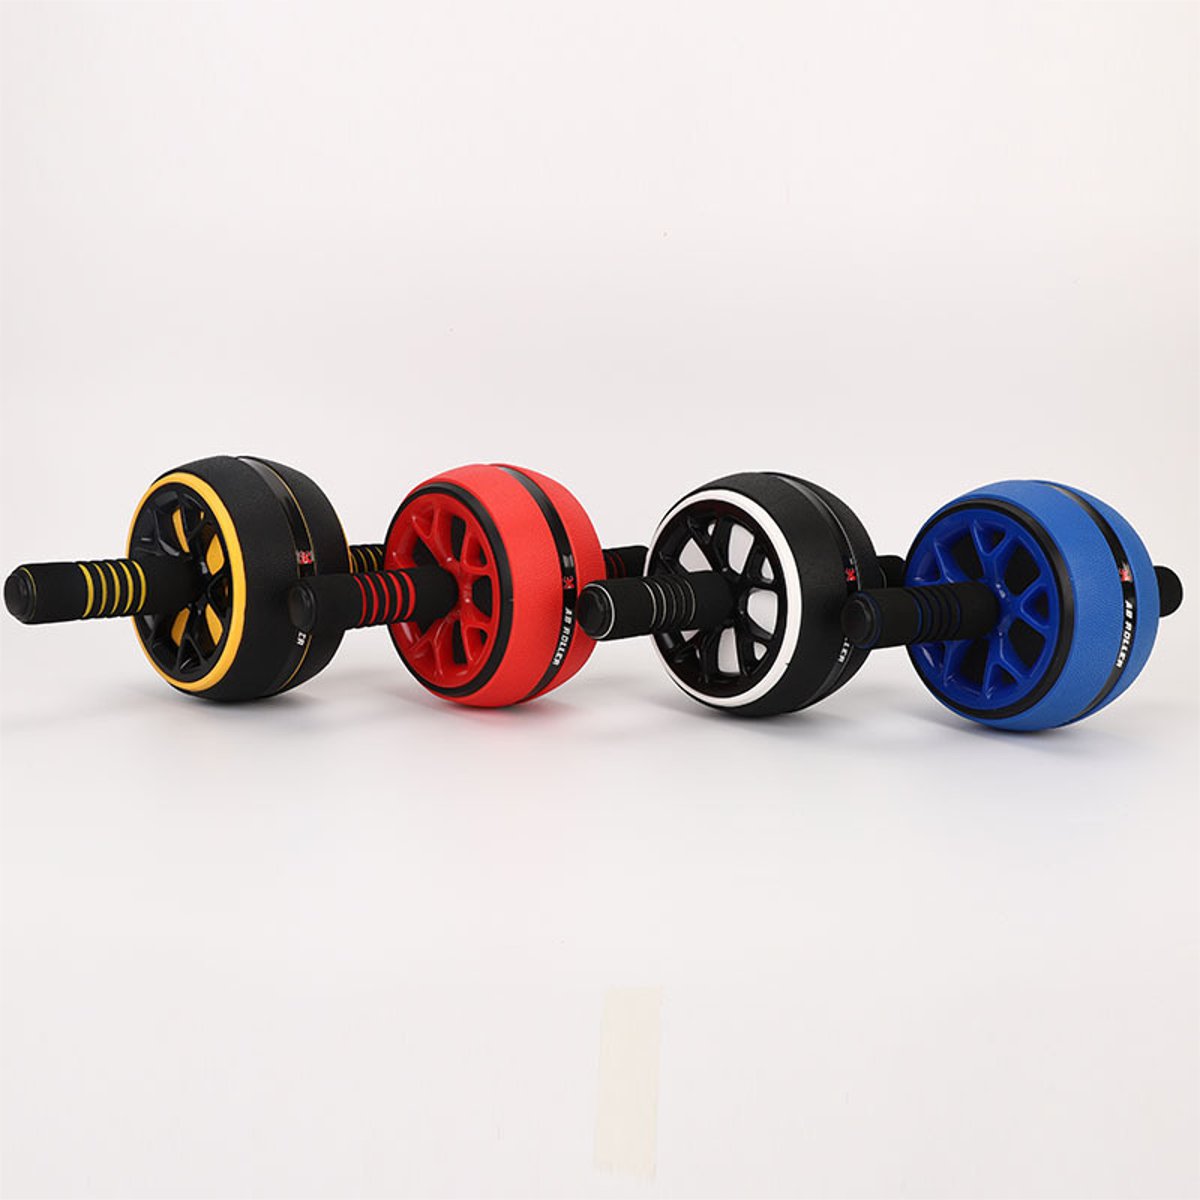 1PC-Wider-Ab-Roller-Wheel-With-Knee-Pad-for-Core-Training-Abdominal-Workout-Fitness-Exercise-Tools-1669168-10